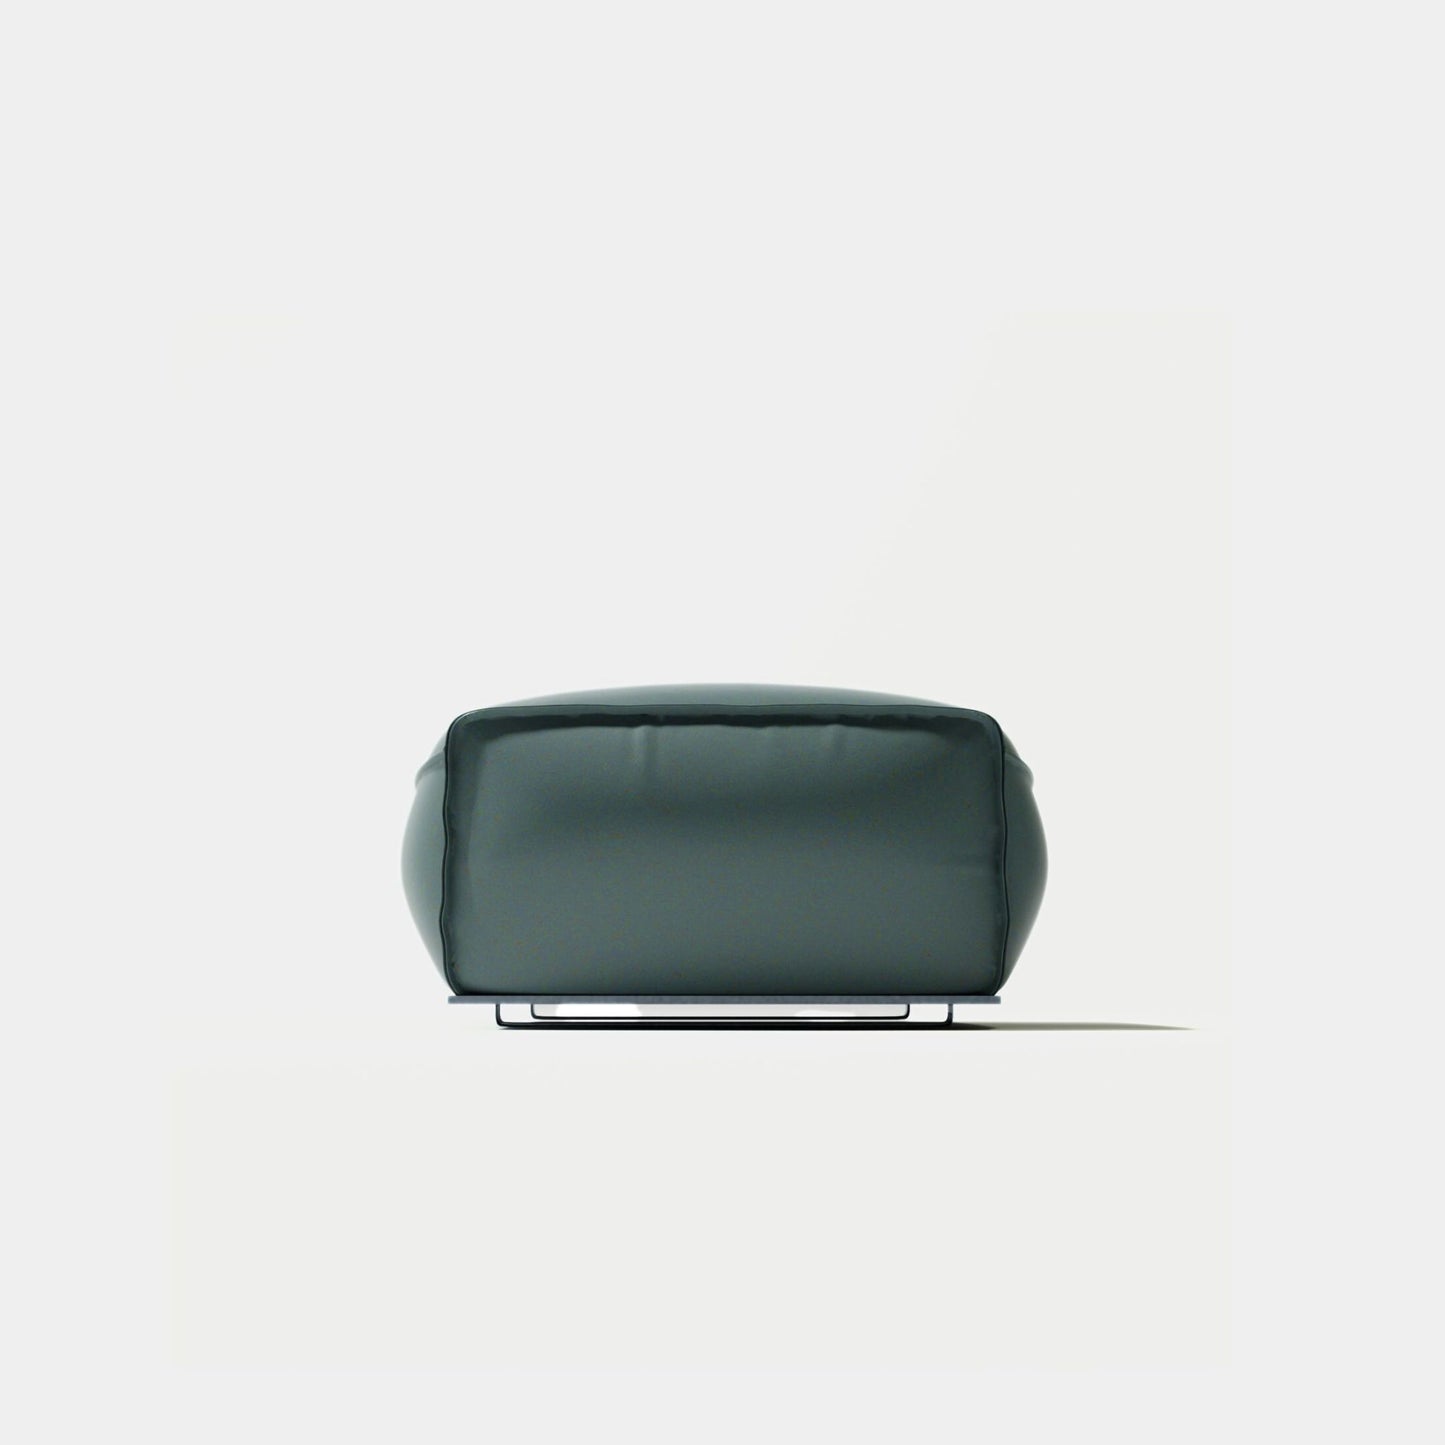 Colby leather ottoman blue